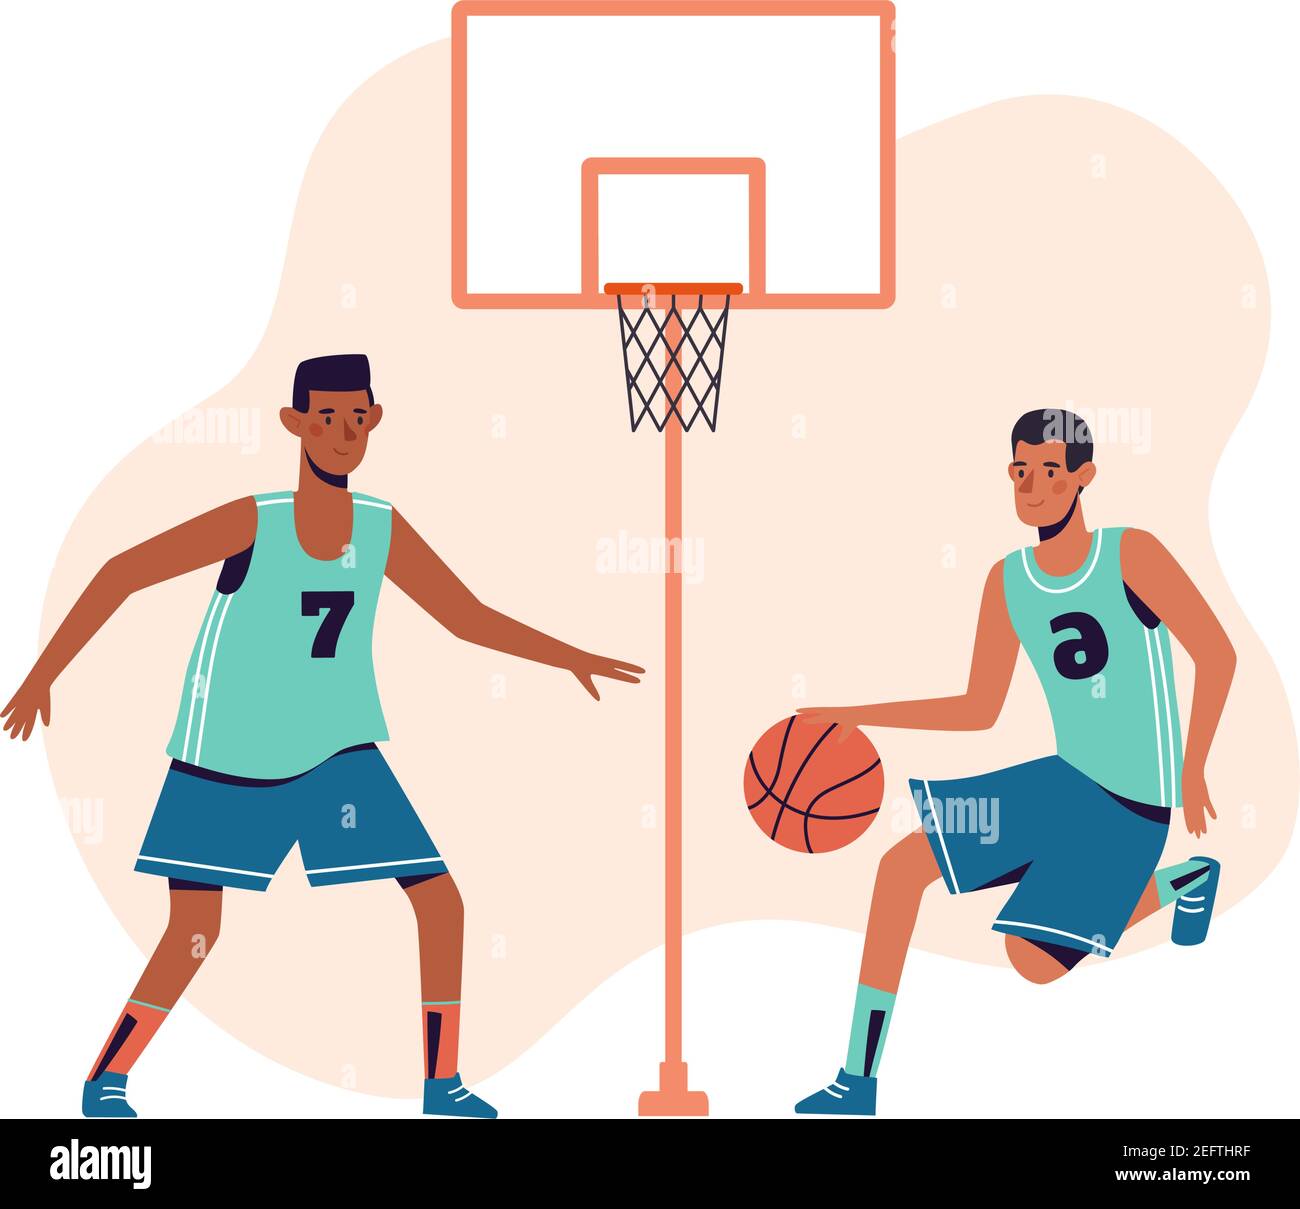 Men are playing basketball. Flat design concept with guys who go in for sports playing ball. Vector illustrations of athletes on a white background. Stock Vector